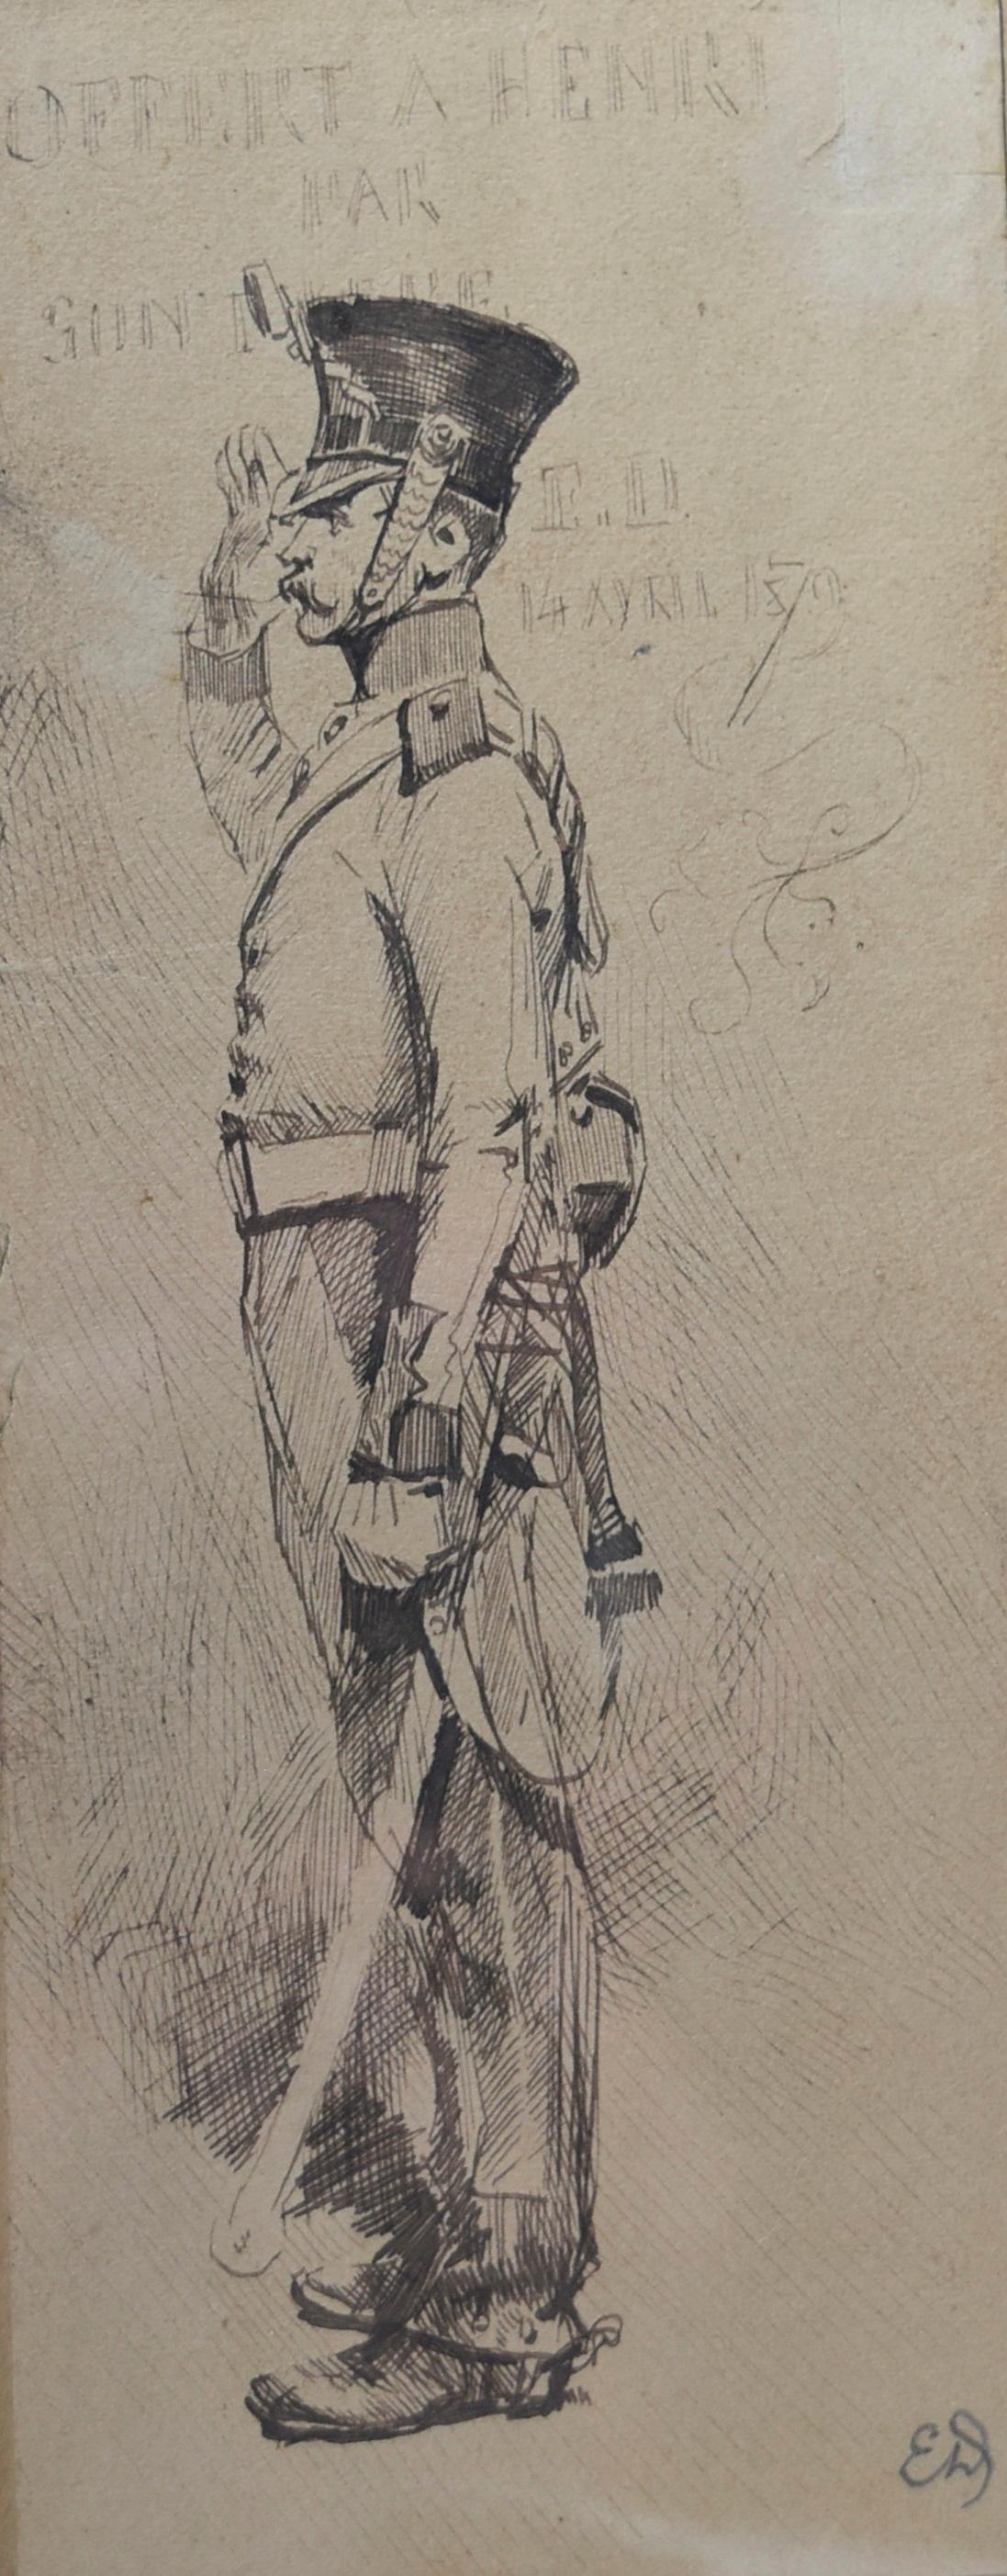 Jean Baptiste Édouard Detaille Figurative Art - Edouard Detaille (1848 1912), A soldier at attention, Original Drawing